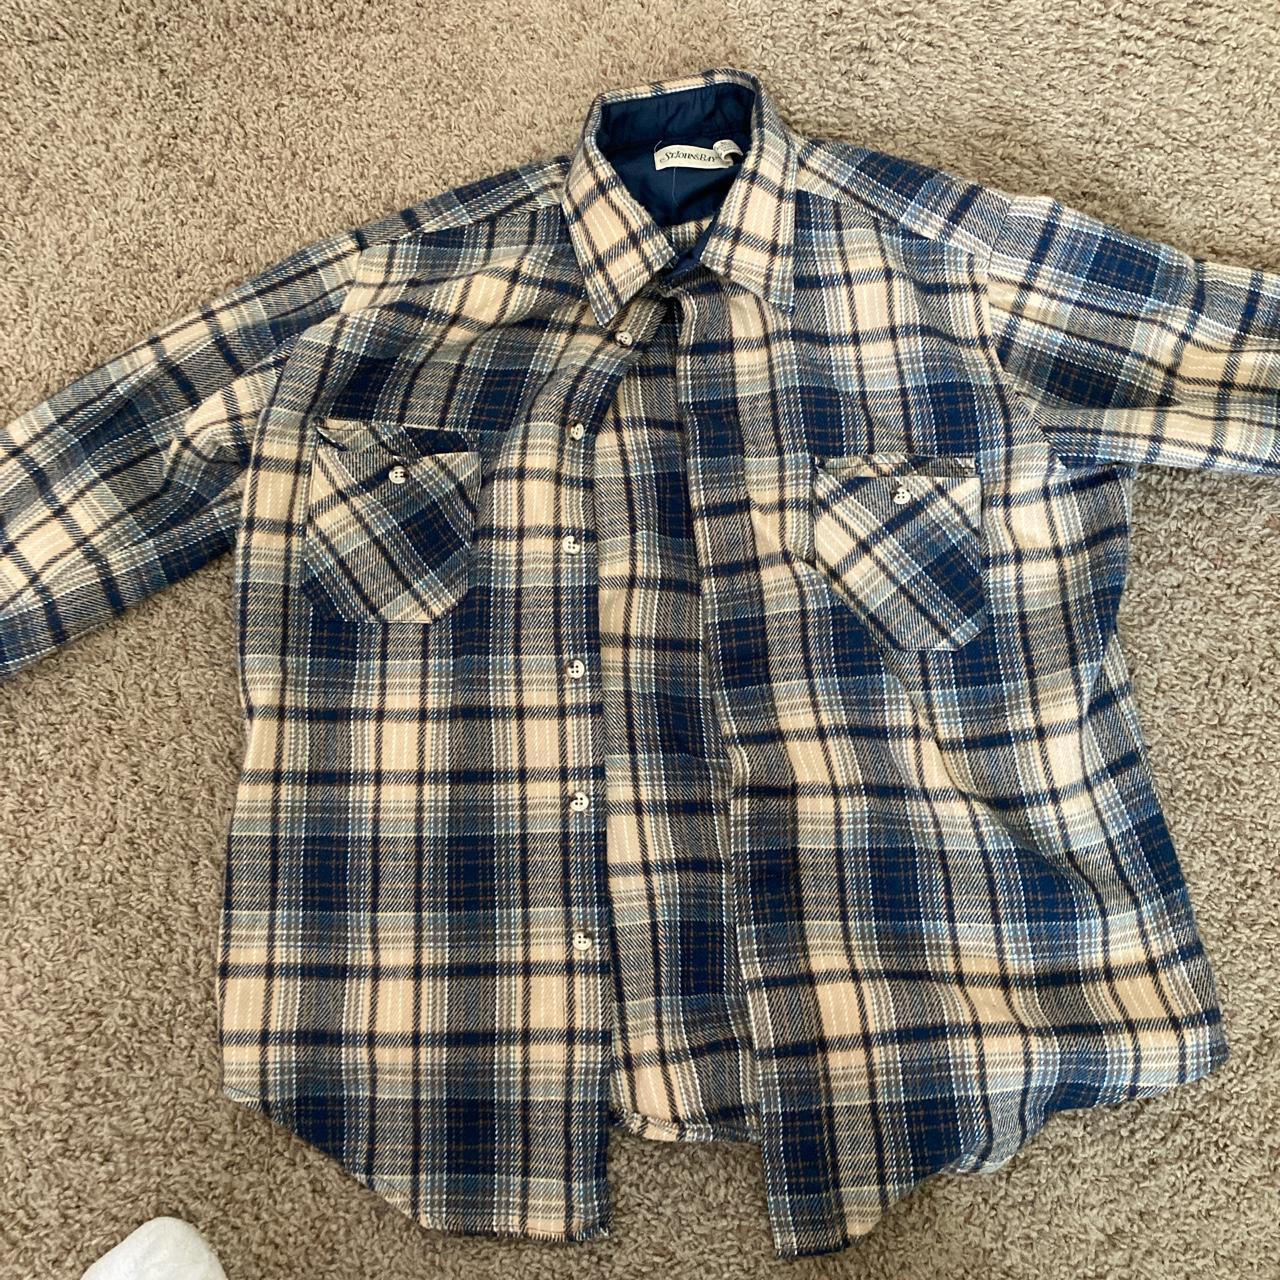 St.Johns bay flannel with acrylic finish inside - Depop